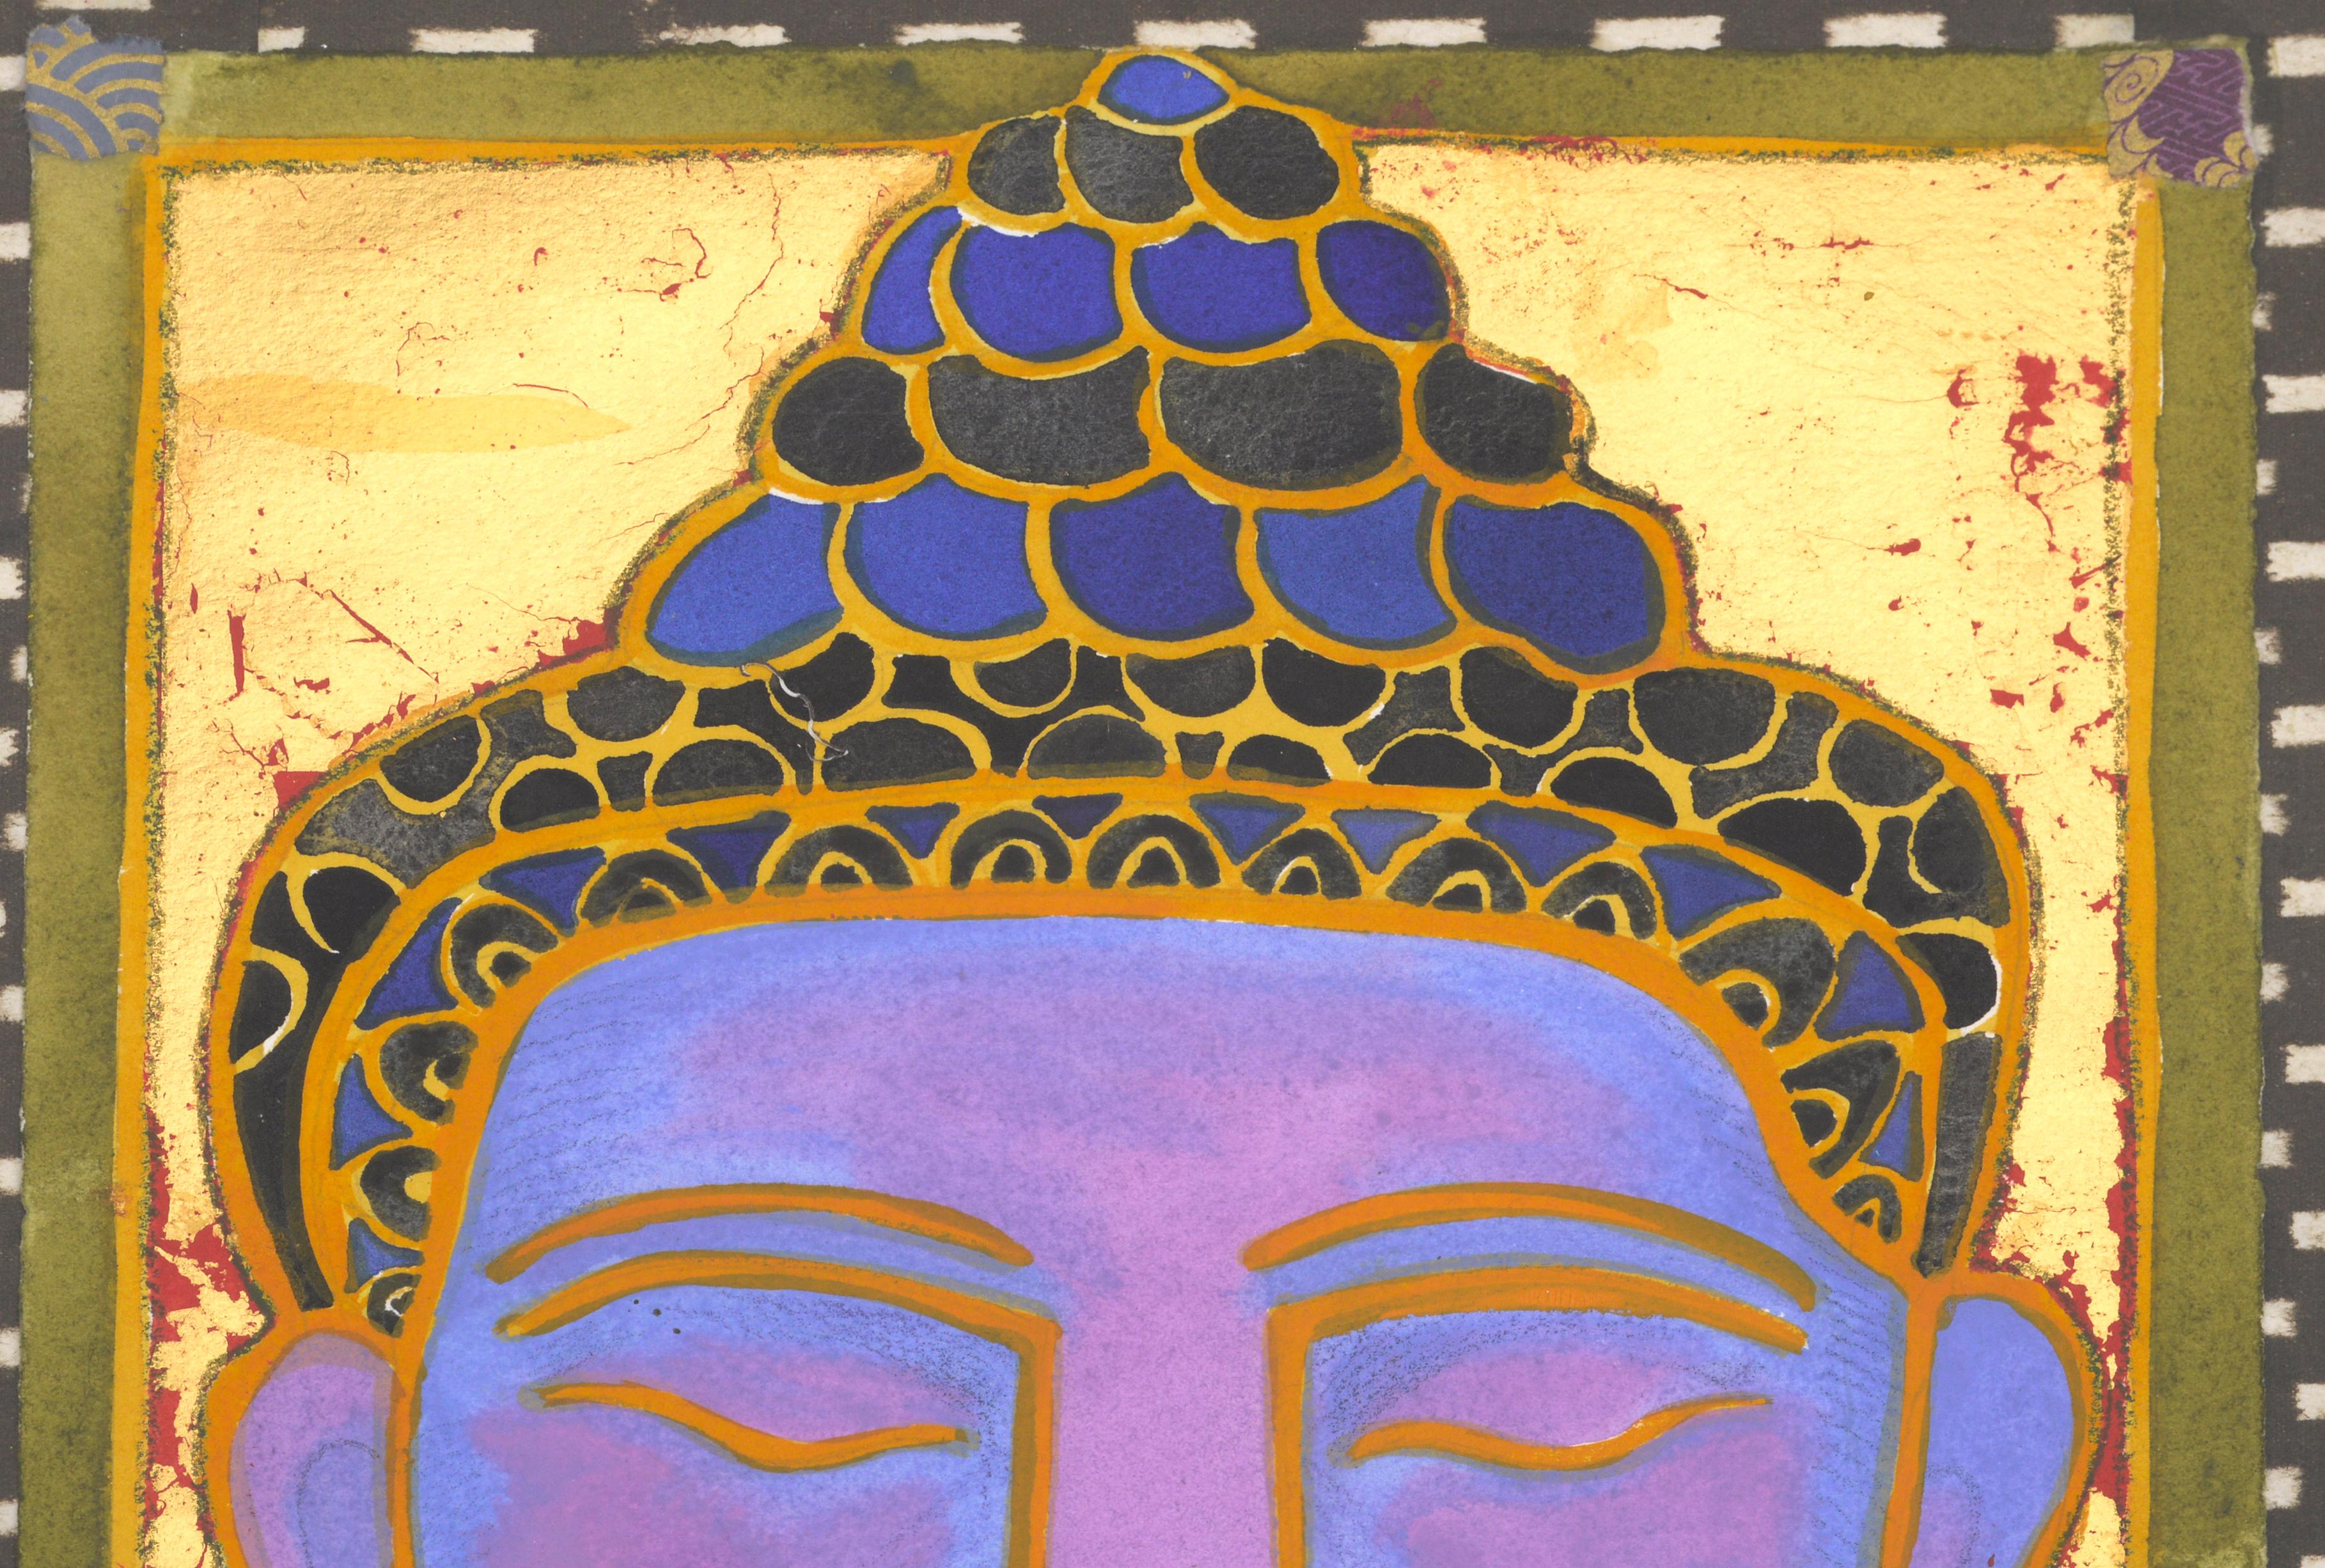 Brightly colored Buddha head by Anna Oneglia (American, b. 1941). This piece utilizes gold leaf in the background behind the Buddha, giving it a glowing quality. Artist's chop appears in the lower right corner. On verso, a description of the piece